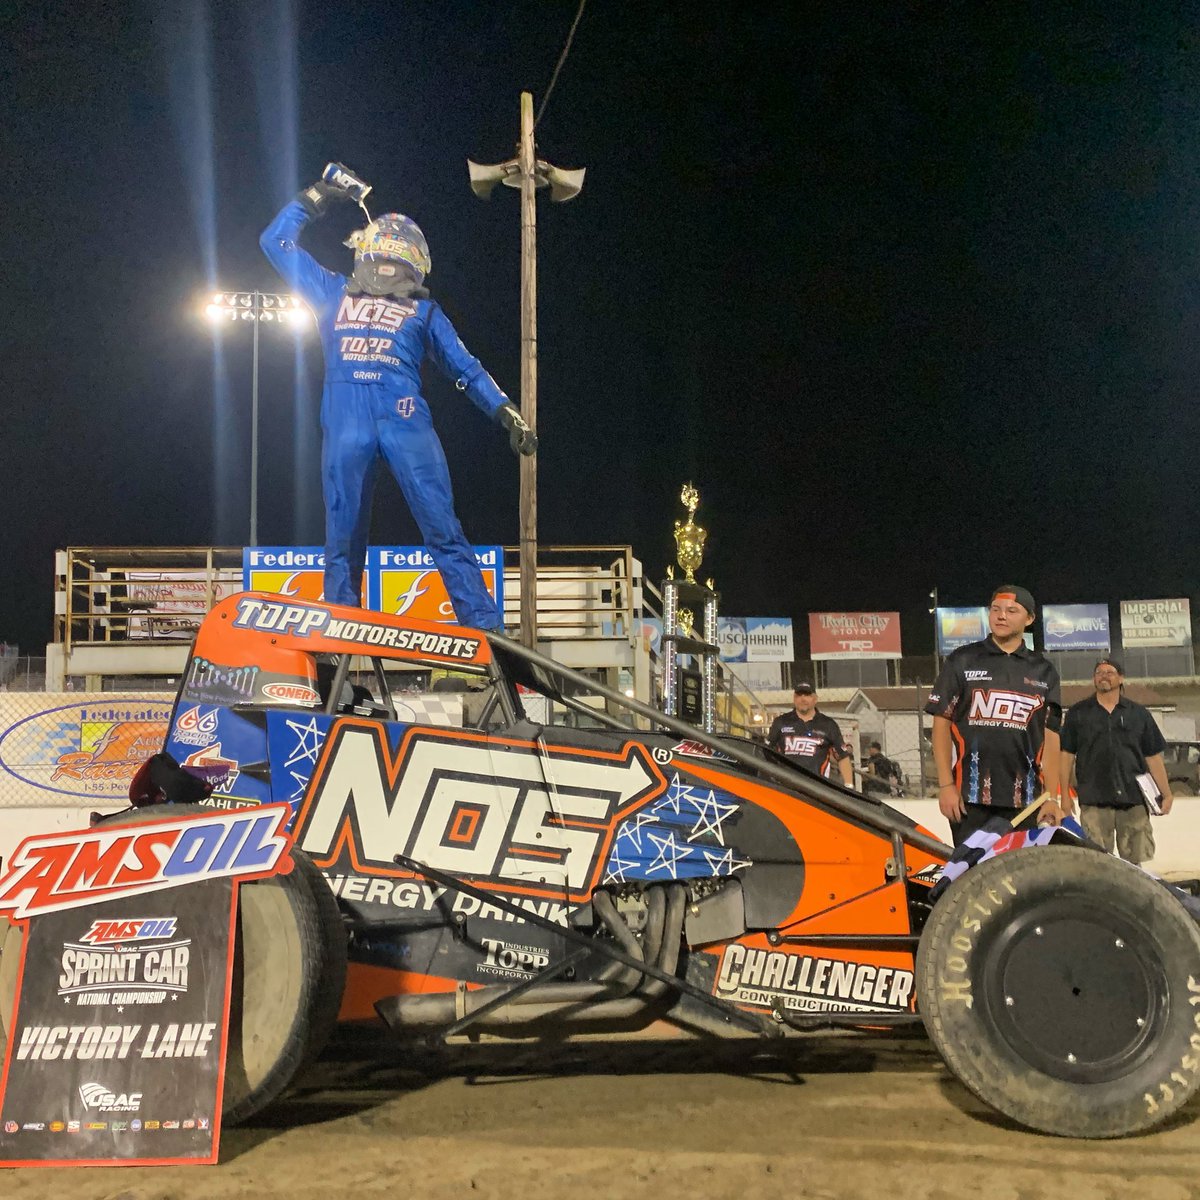 Our @NosEnergyDrink @TOPPMotorsports #4 was on rails again tonight, so we went ahead and picked up another check! Great weekend. Can’t thank everyone in my corner enough. Owners, Crew, Family, Partners. They all have my back 100%. In a special place right now.